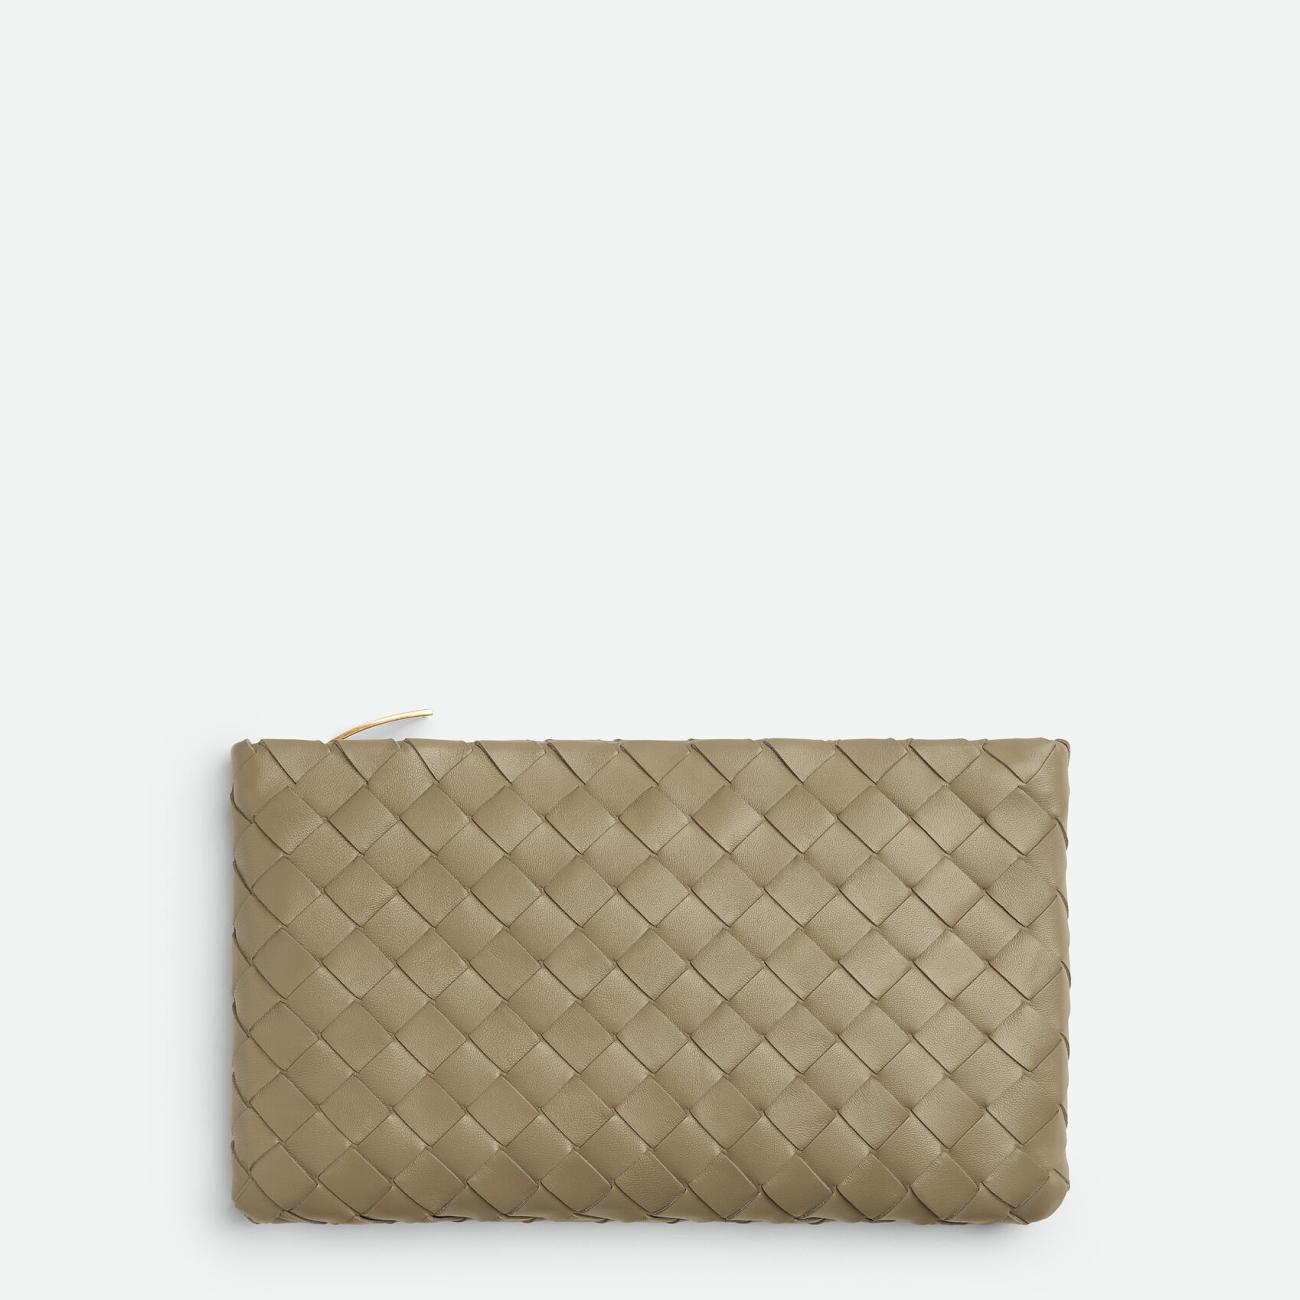 Small Pouch - Taupe